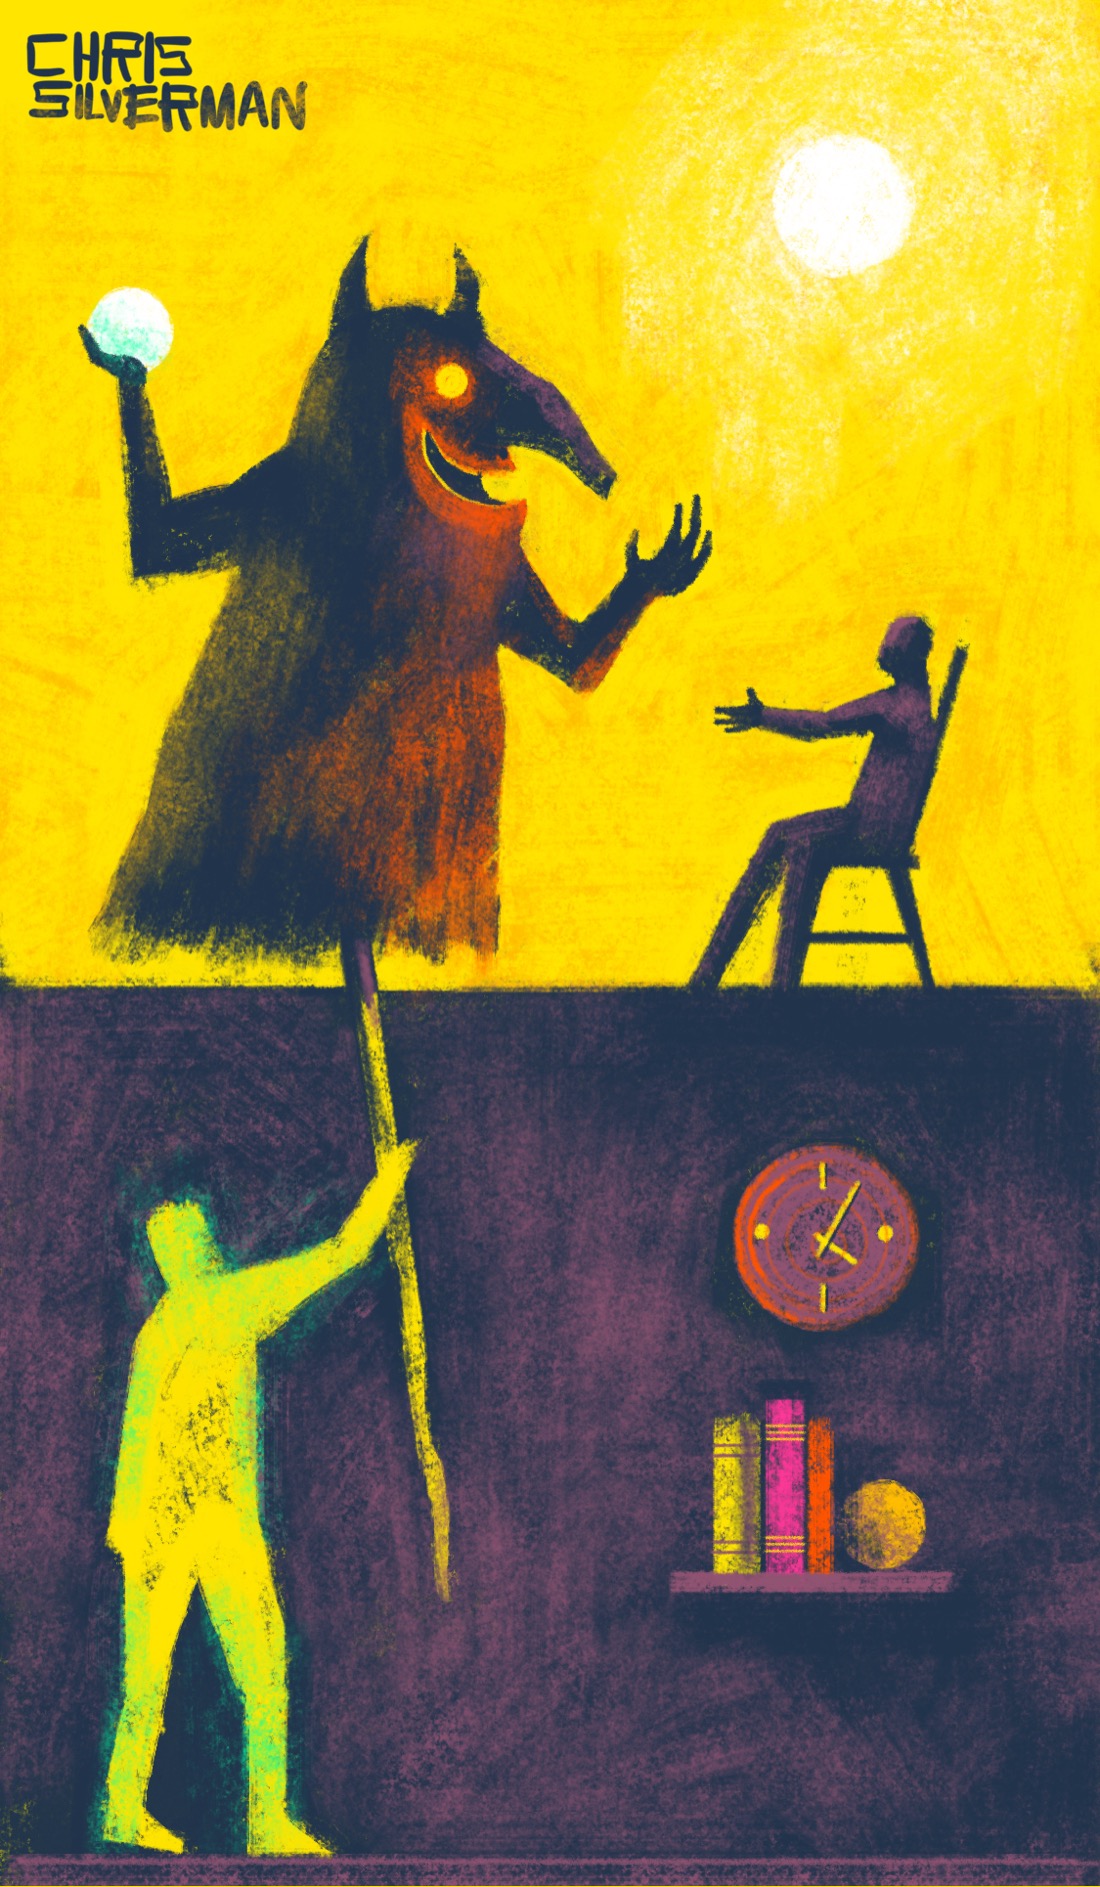 A drawing evenly divided into two sections: an upper one, all yellow, and a lower one, which is purpleish black. The effect suggests a cross-section of a two-story building. In the upper section, a reddish monster with a long snout and horns seems to be entertaining a person in a chair. The monster is talking to the person and holding up glowing white orb. The sun is shining in the sky. Below, we see the monster is actually a puppet on the end of a long pole held by a yellow person. The basement area, such as it is, has a small, dull-purple clock on the right side, with a bookshelf of colored books below it.